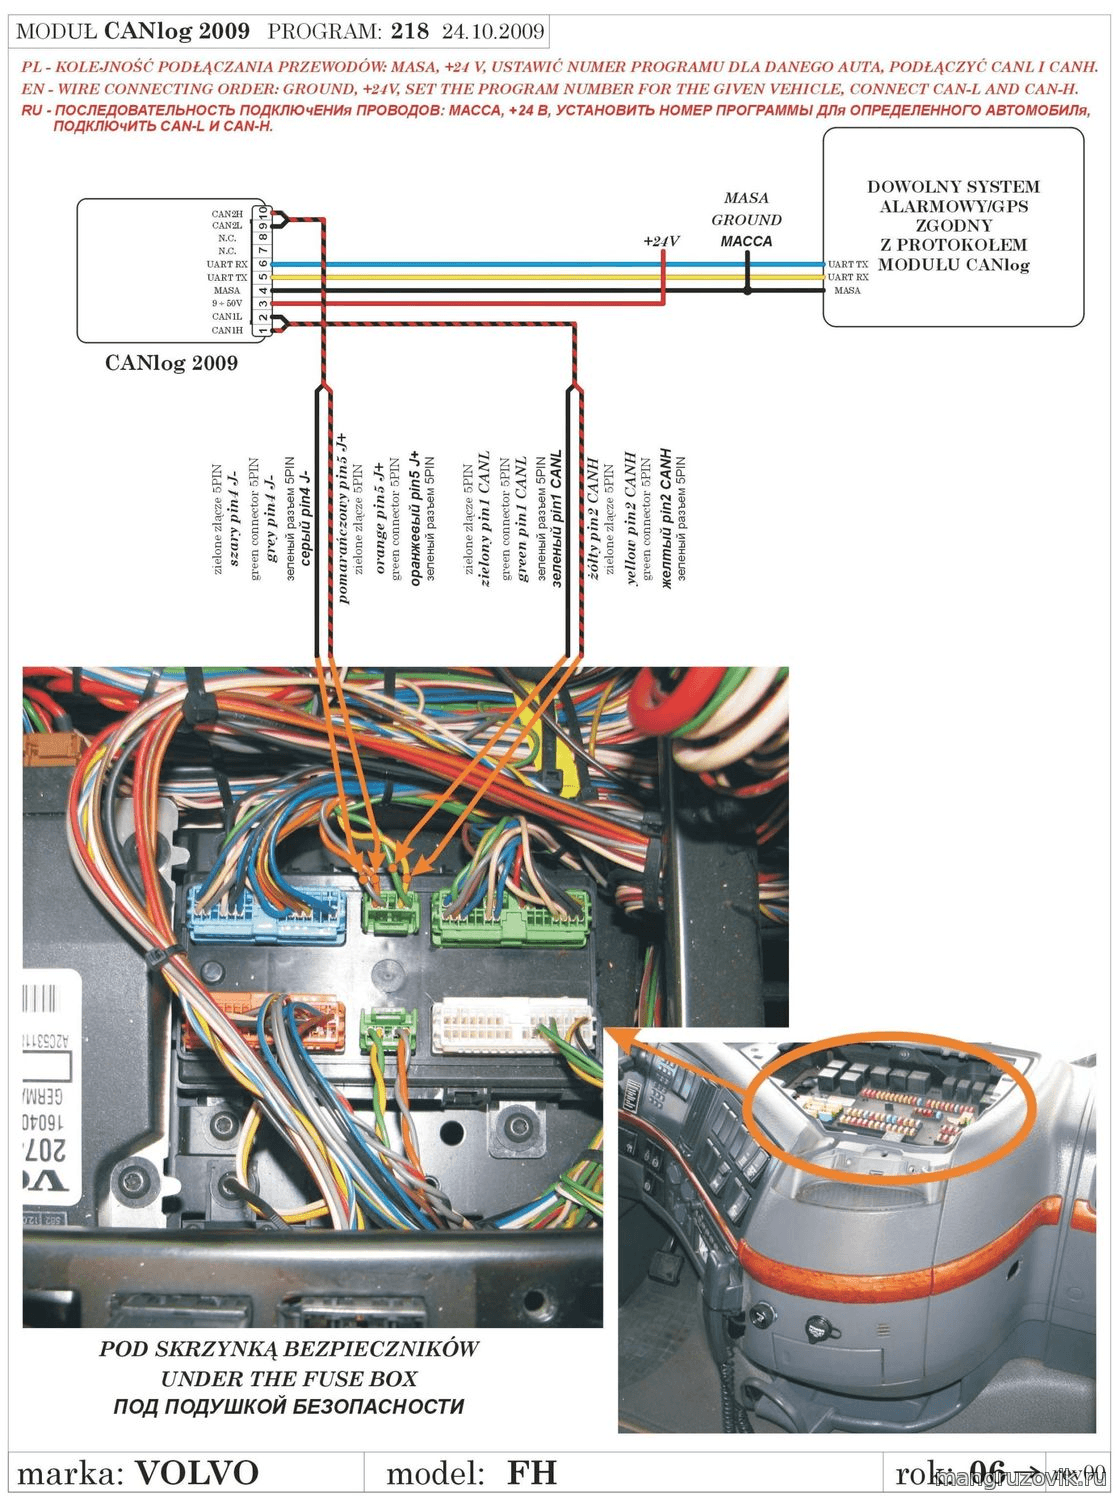 Fuel flow meter connection to CAN-bus example